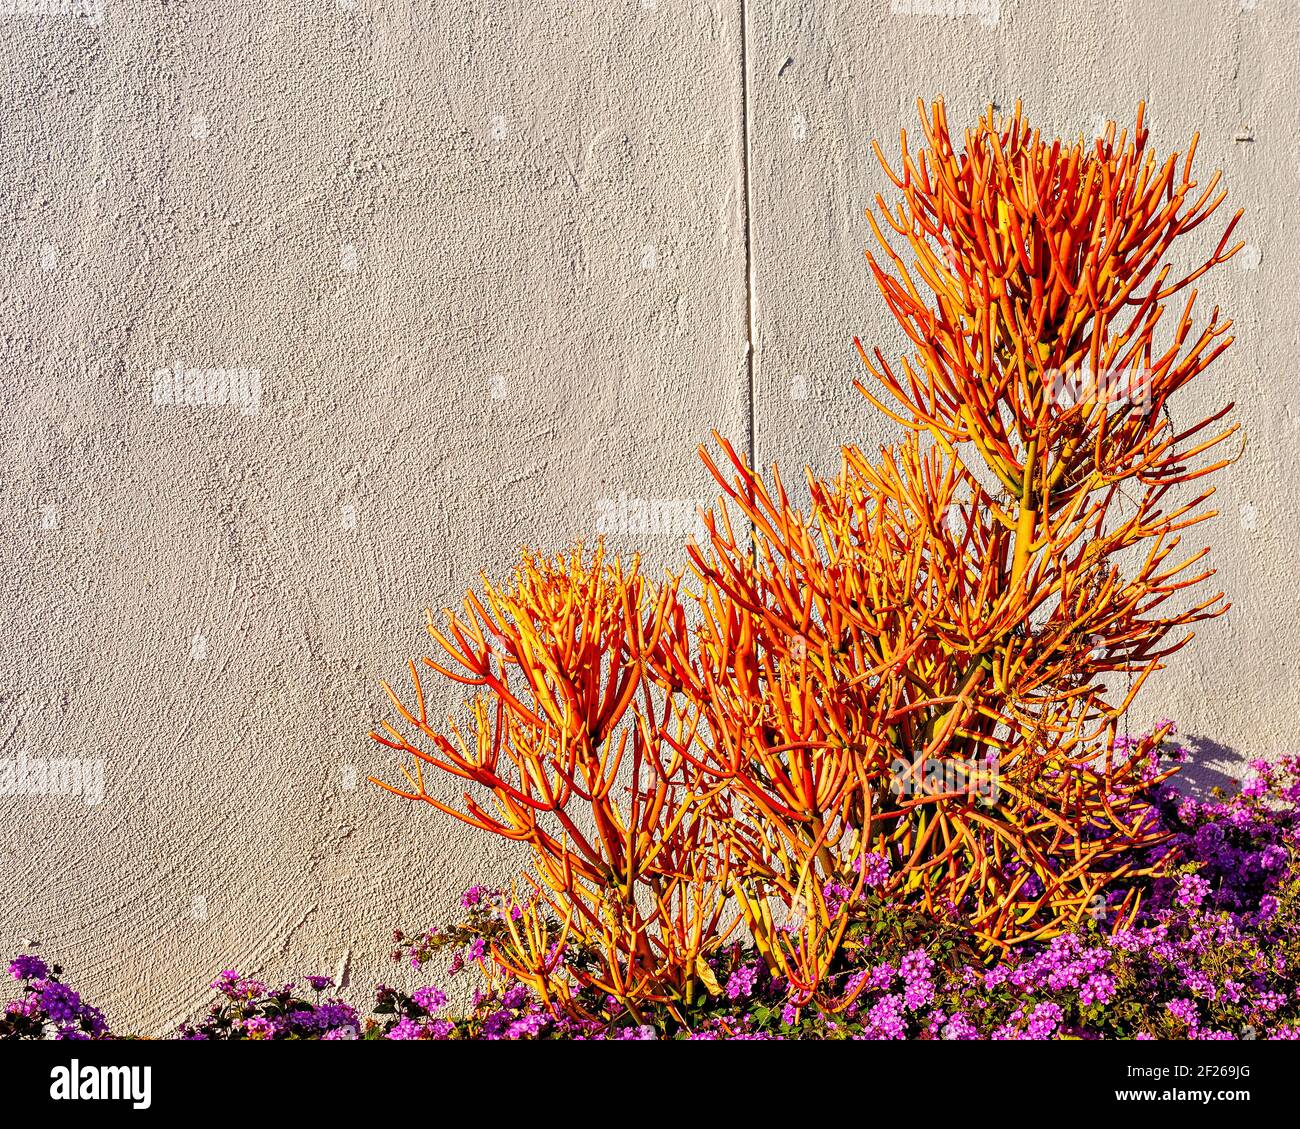 Fire stick cactus growing in garden of purple flowers against white stucco wall. Stock Photo